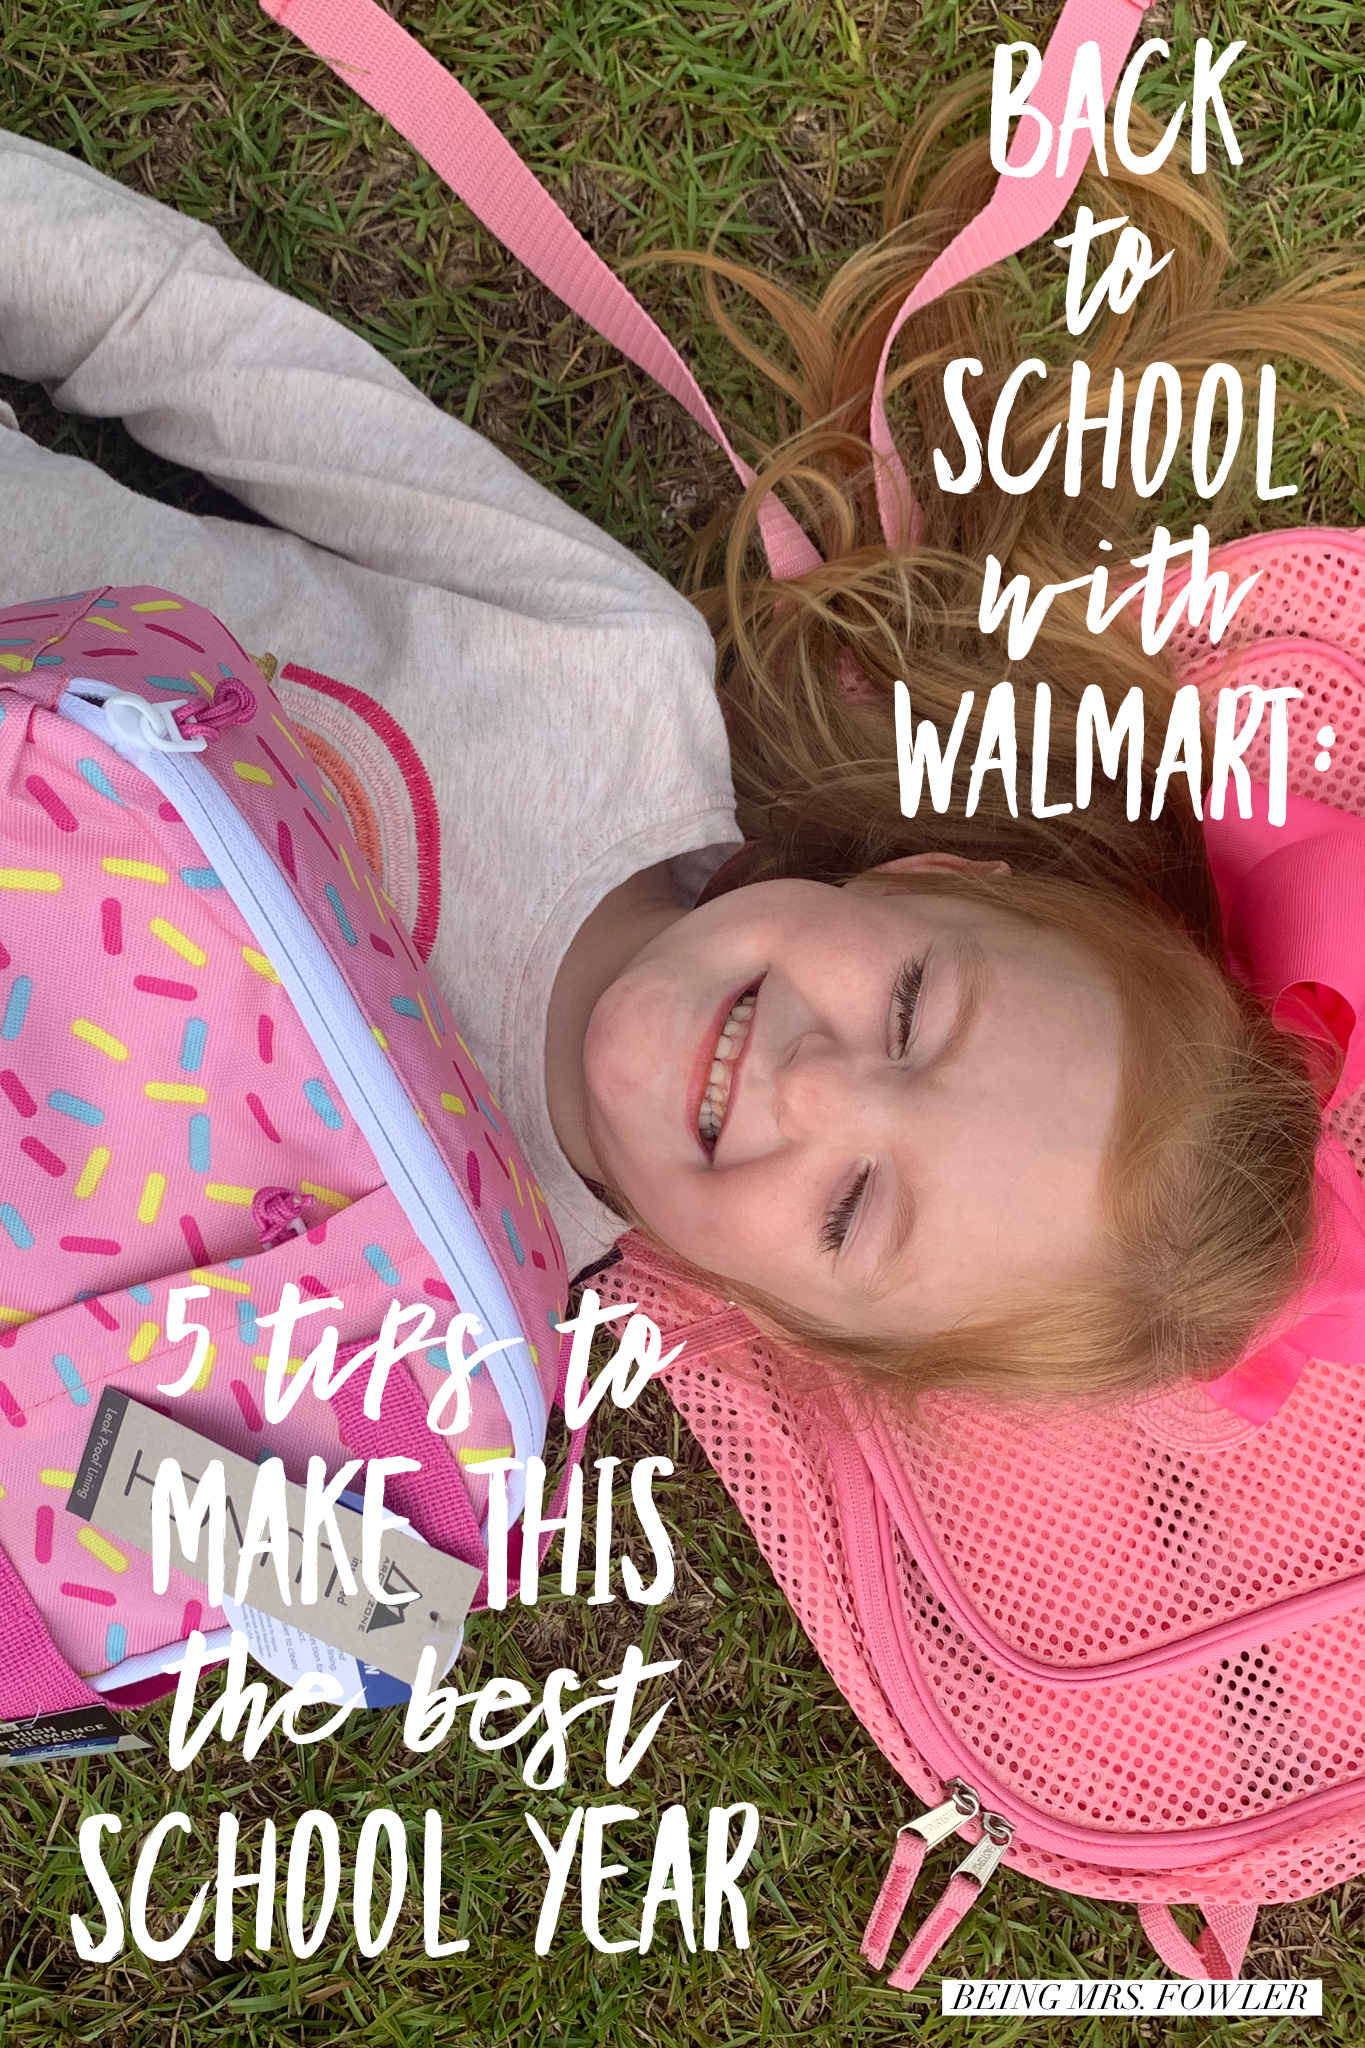 tips to make this the best school year, being mrs. fowler, walmart back to school fashion